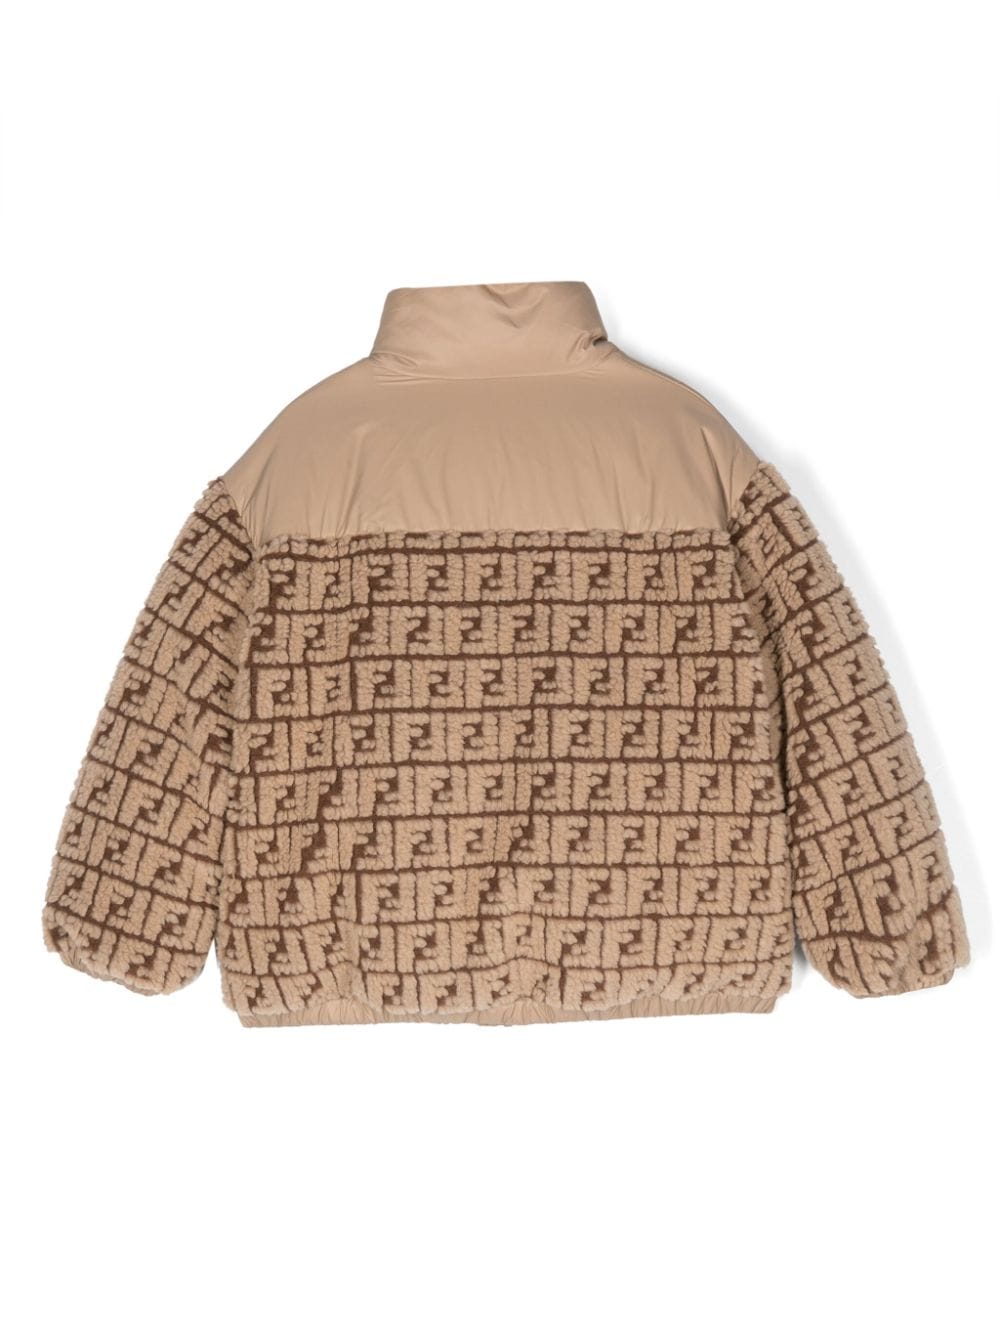 Beige jacket for boys with all-over logo